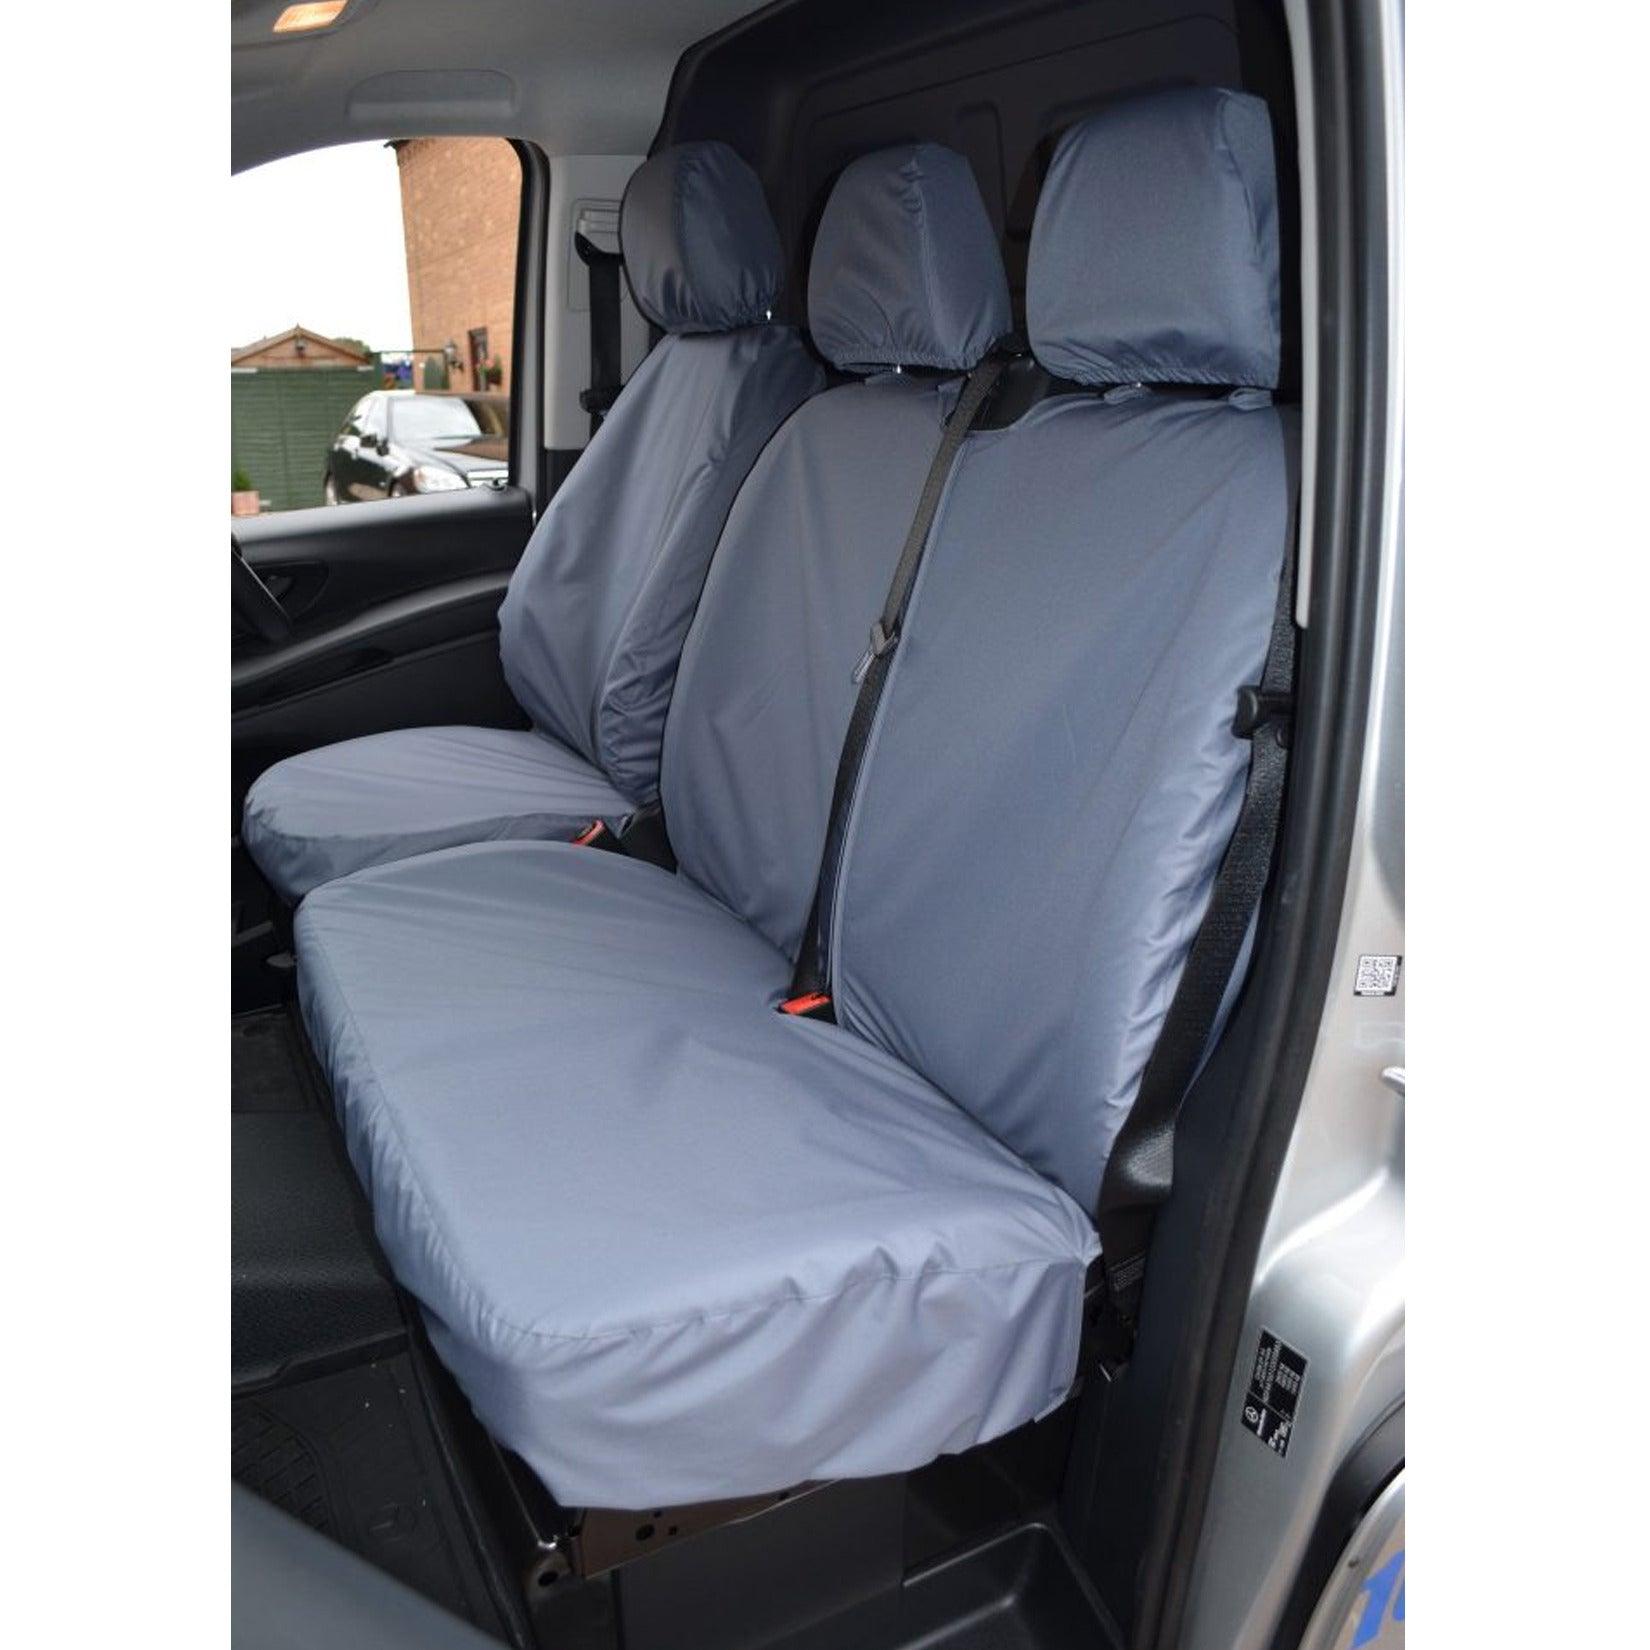 MERCEDES VITO 2015 ON DRIVER AND FRONT DOUBLE PASSENGER SEAT COVERS - GREY - Storm Xccessories2